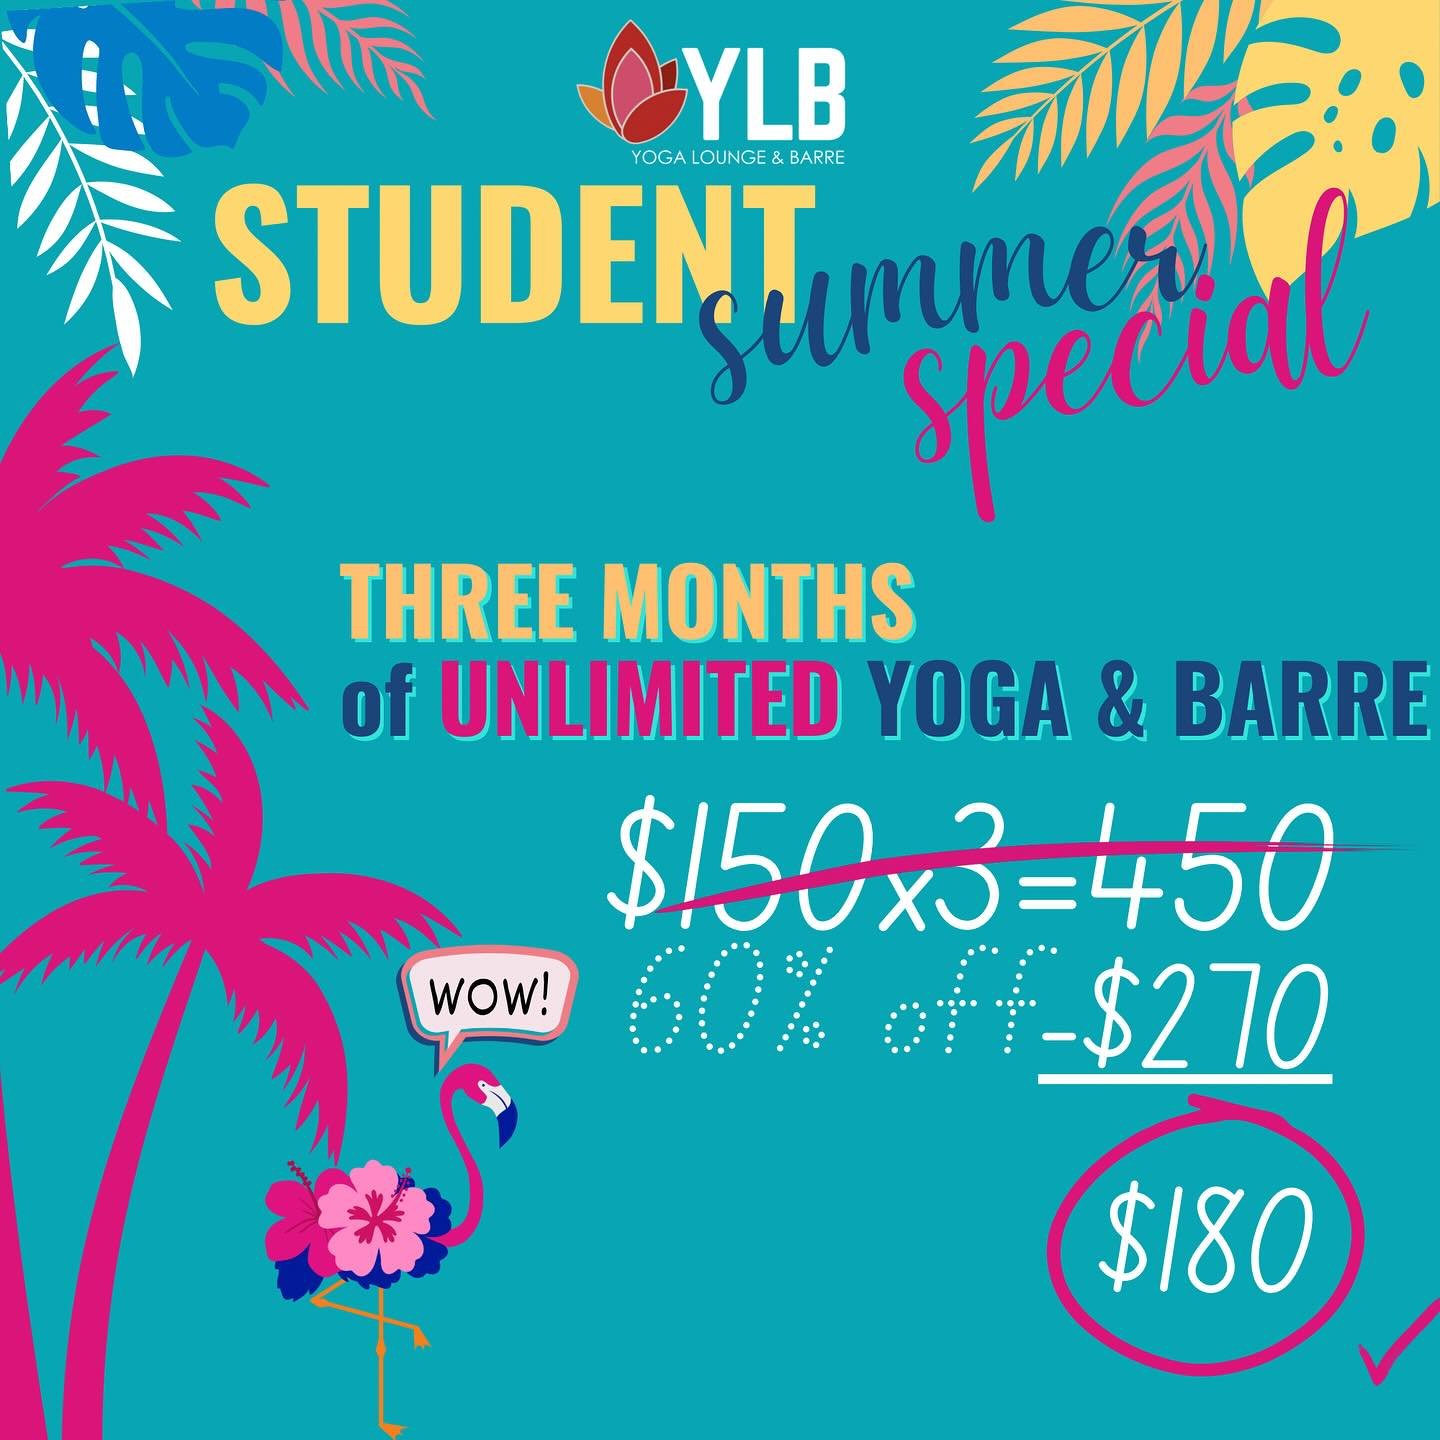 ☀️ Attn: students &amp; teachers&hellip;spend your summer in savasana!

✨Swipe for Teacher Savings :). 
✨Sale ends May 31
✨Open to High School &amp; Undergrads
✨Teacher pass open to current teachers and includes summer challenge registration.